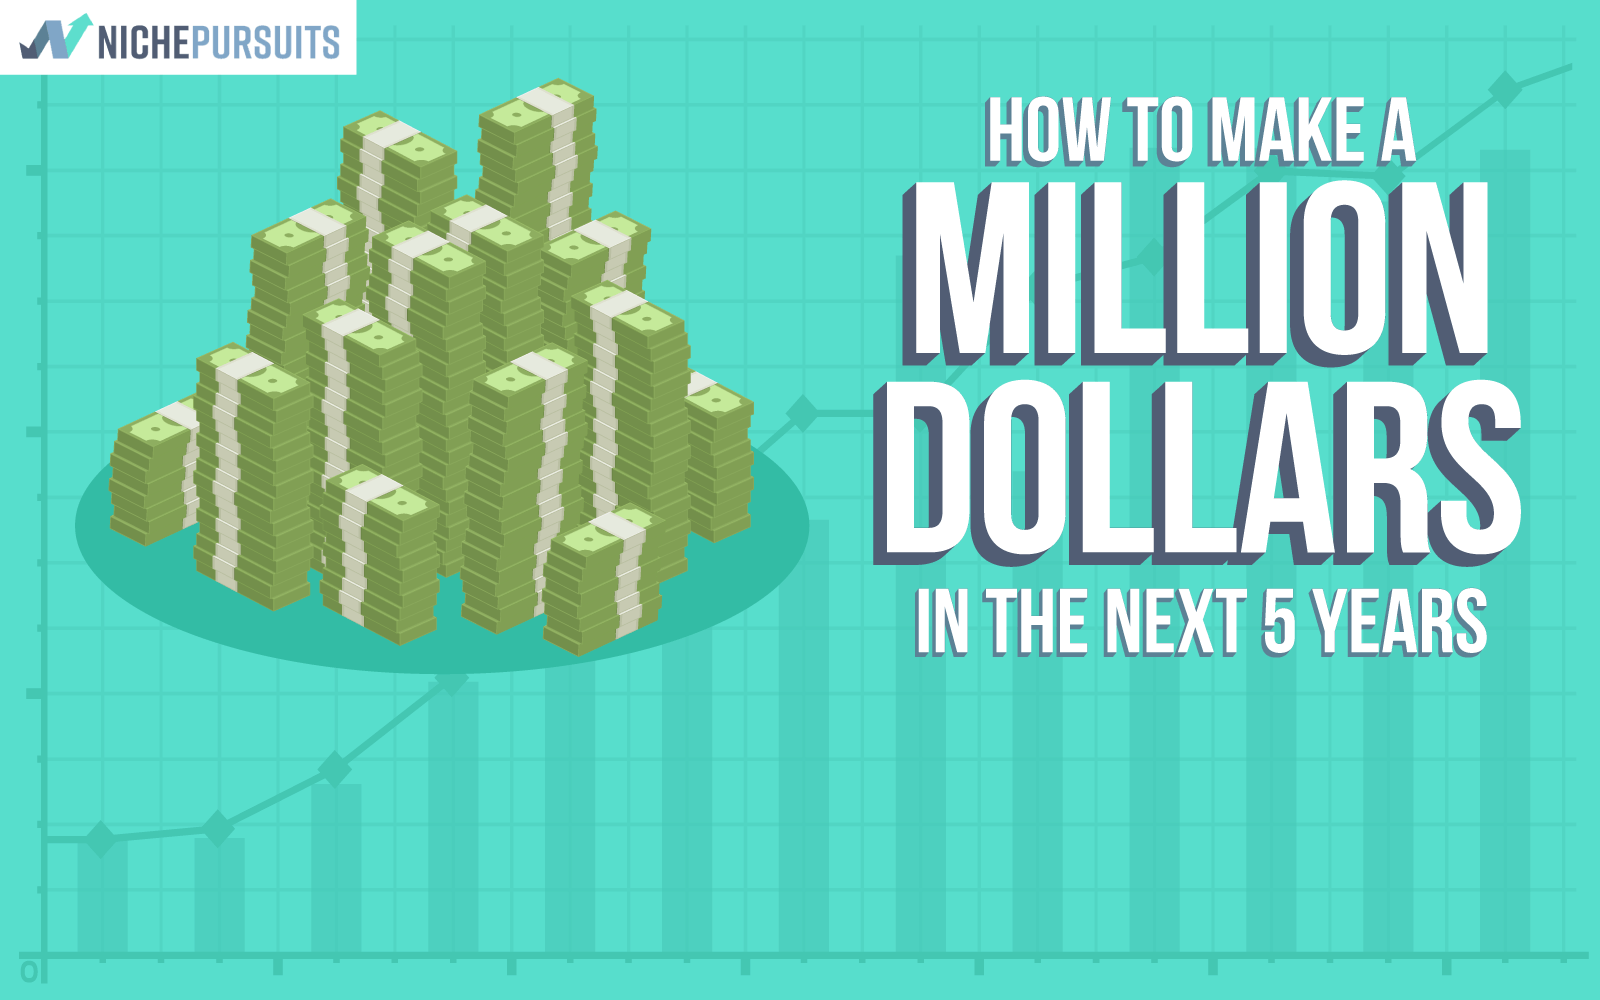 what would you do with 1 million dollars